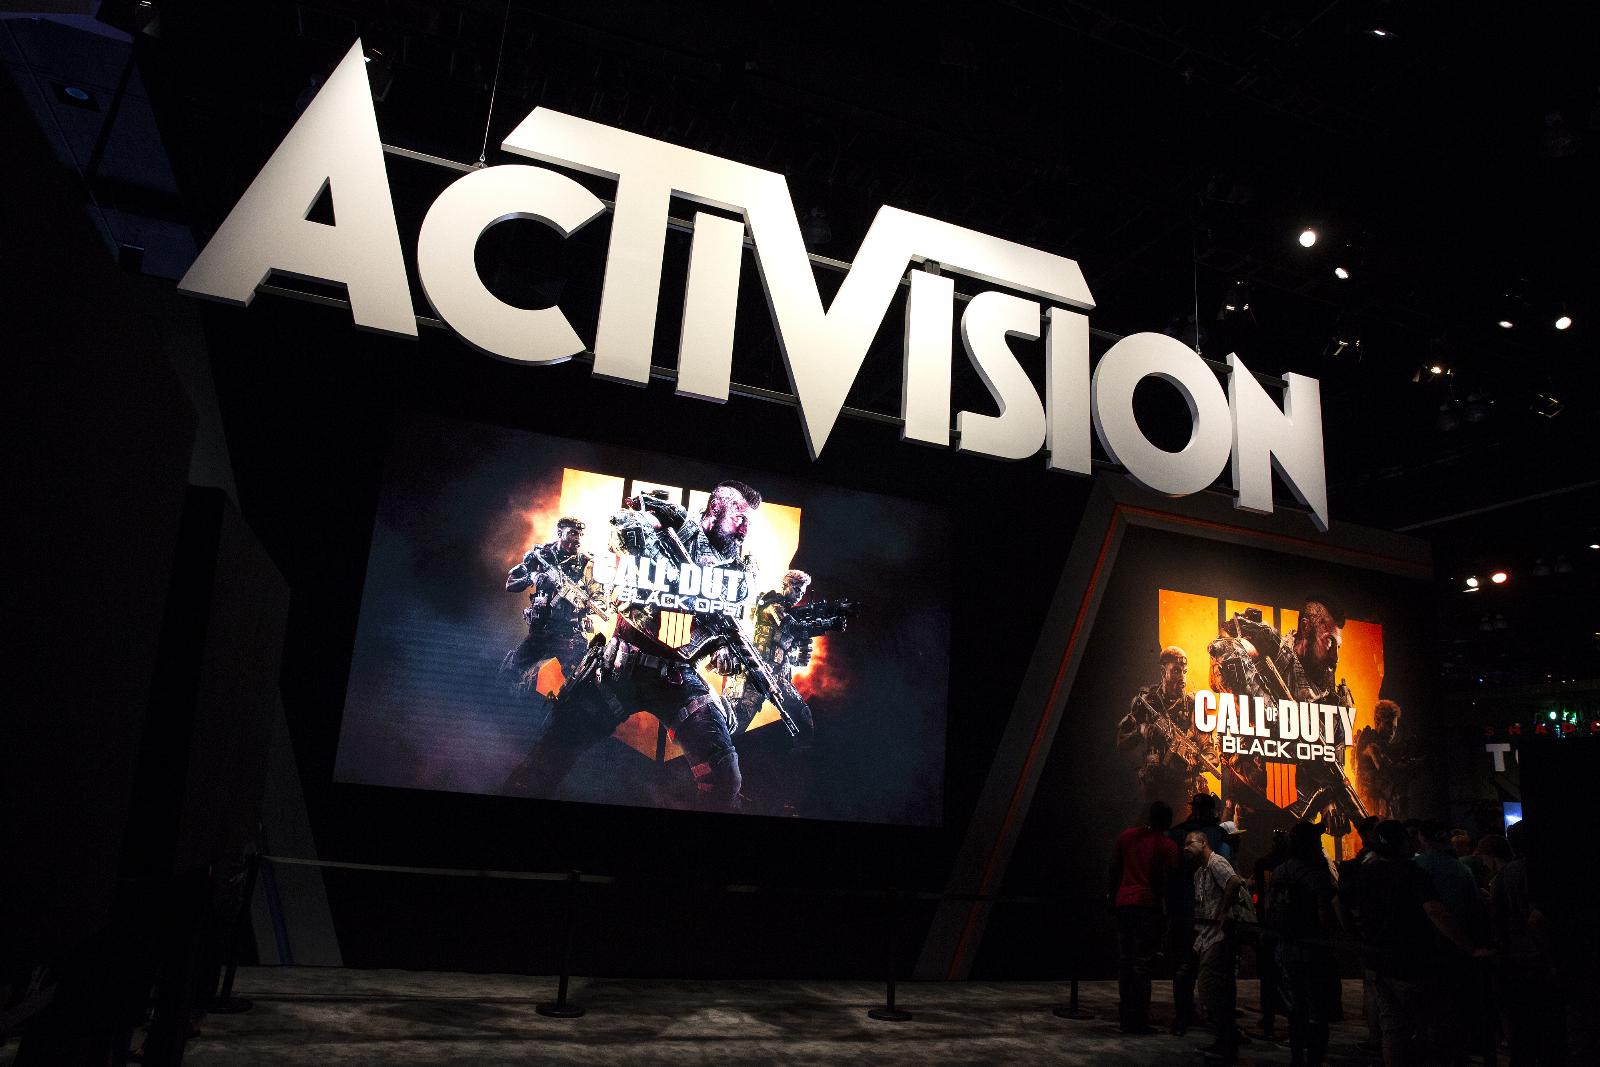 Activision Blizzard will pay $54 million to settle California workplace discrimination suit